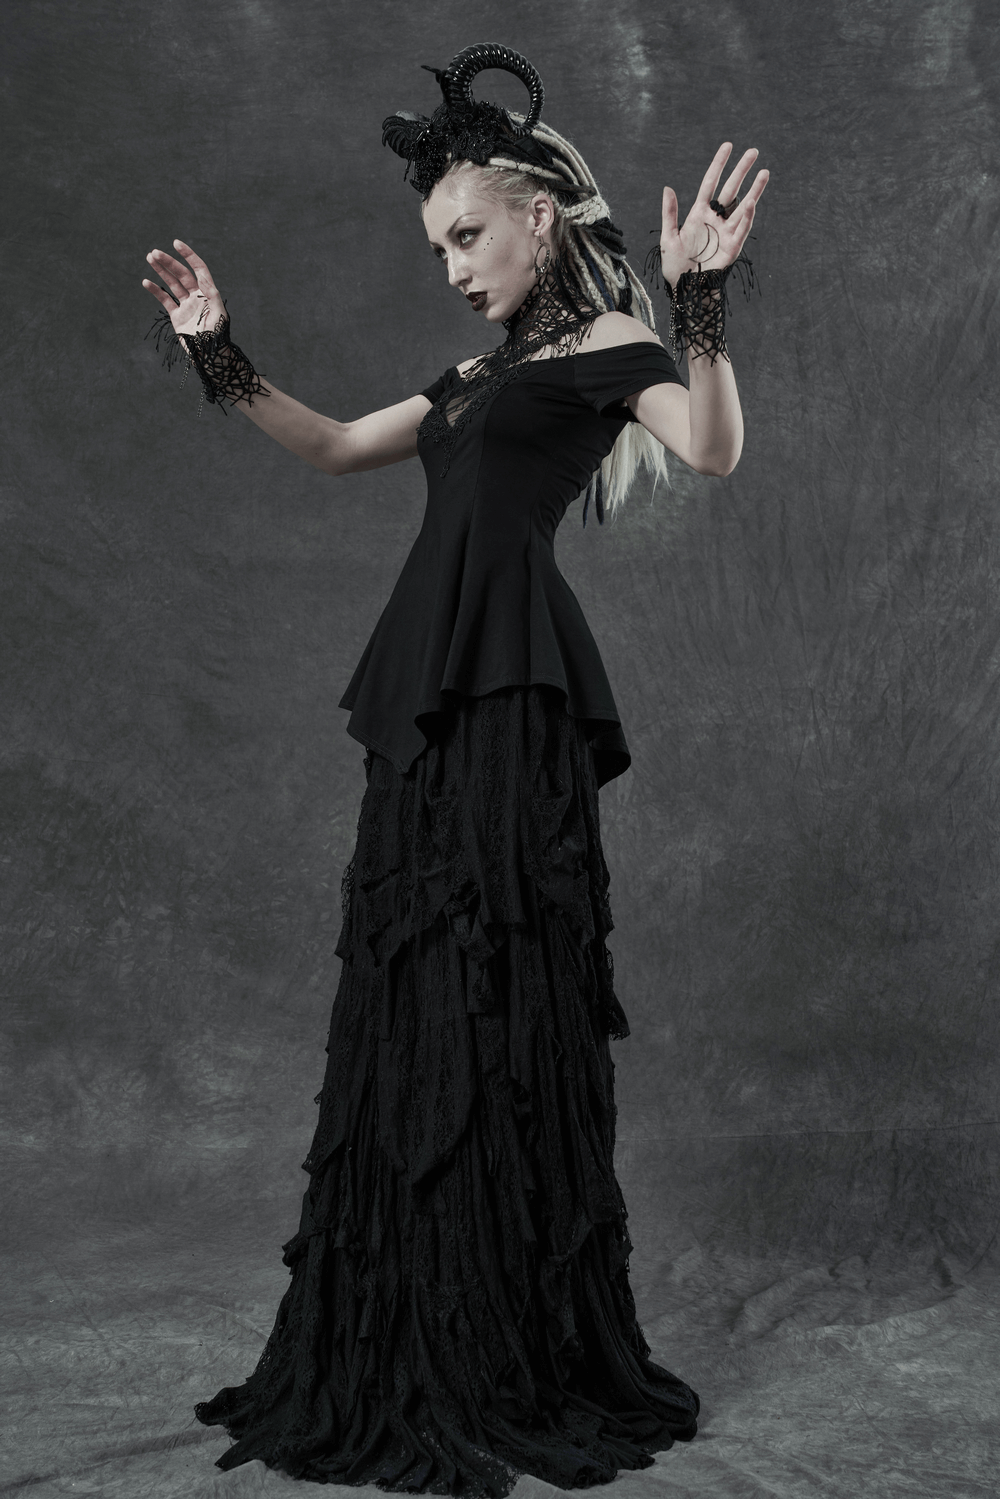 Gothic Black Lace Glove and Neck Set with Tassels